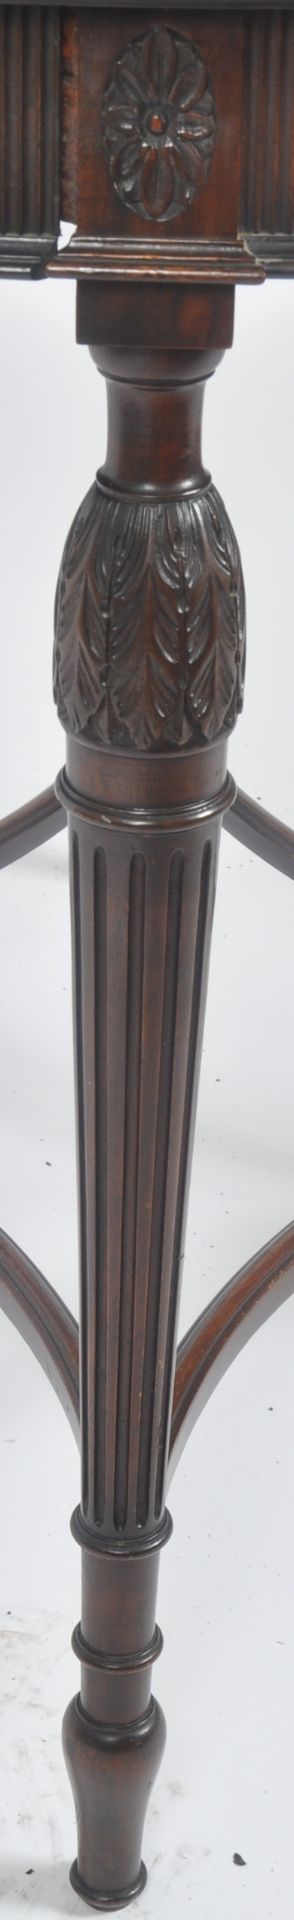 EDWARDIAN MAHOGANY ADAMS REVIVAL CENTRE OCCASIONAL TABLE - Image 4 of 9